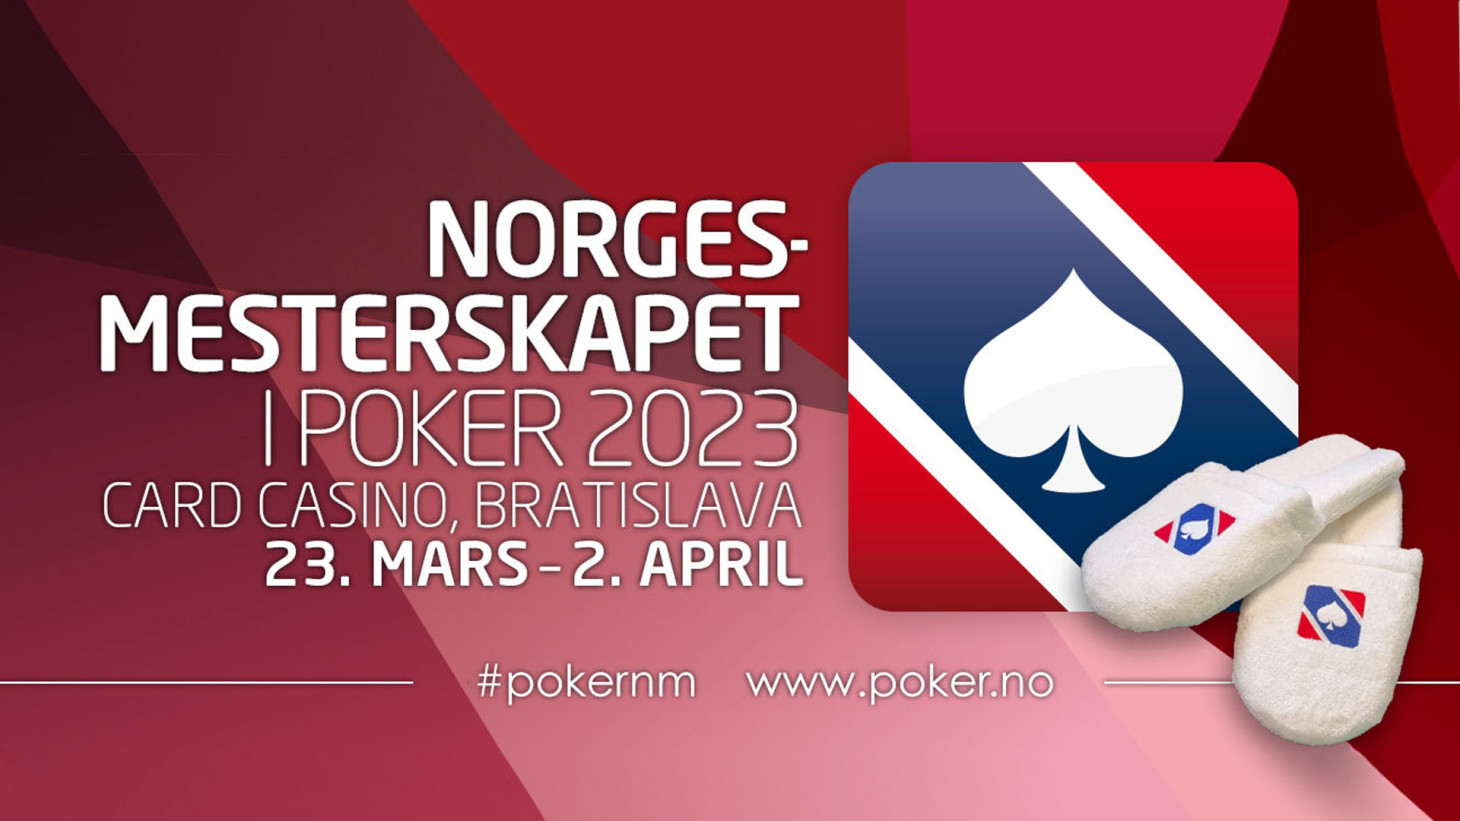 Norgesmesterskapet and poker in Card Casino. Hundreds of thousands of euros and great prestige will be at stake